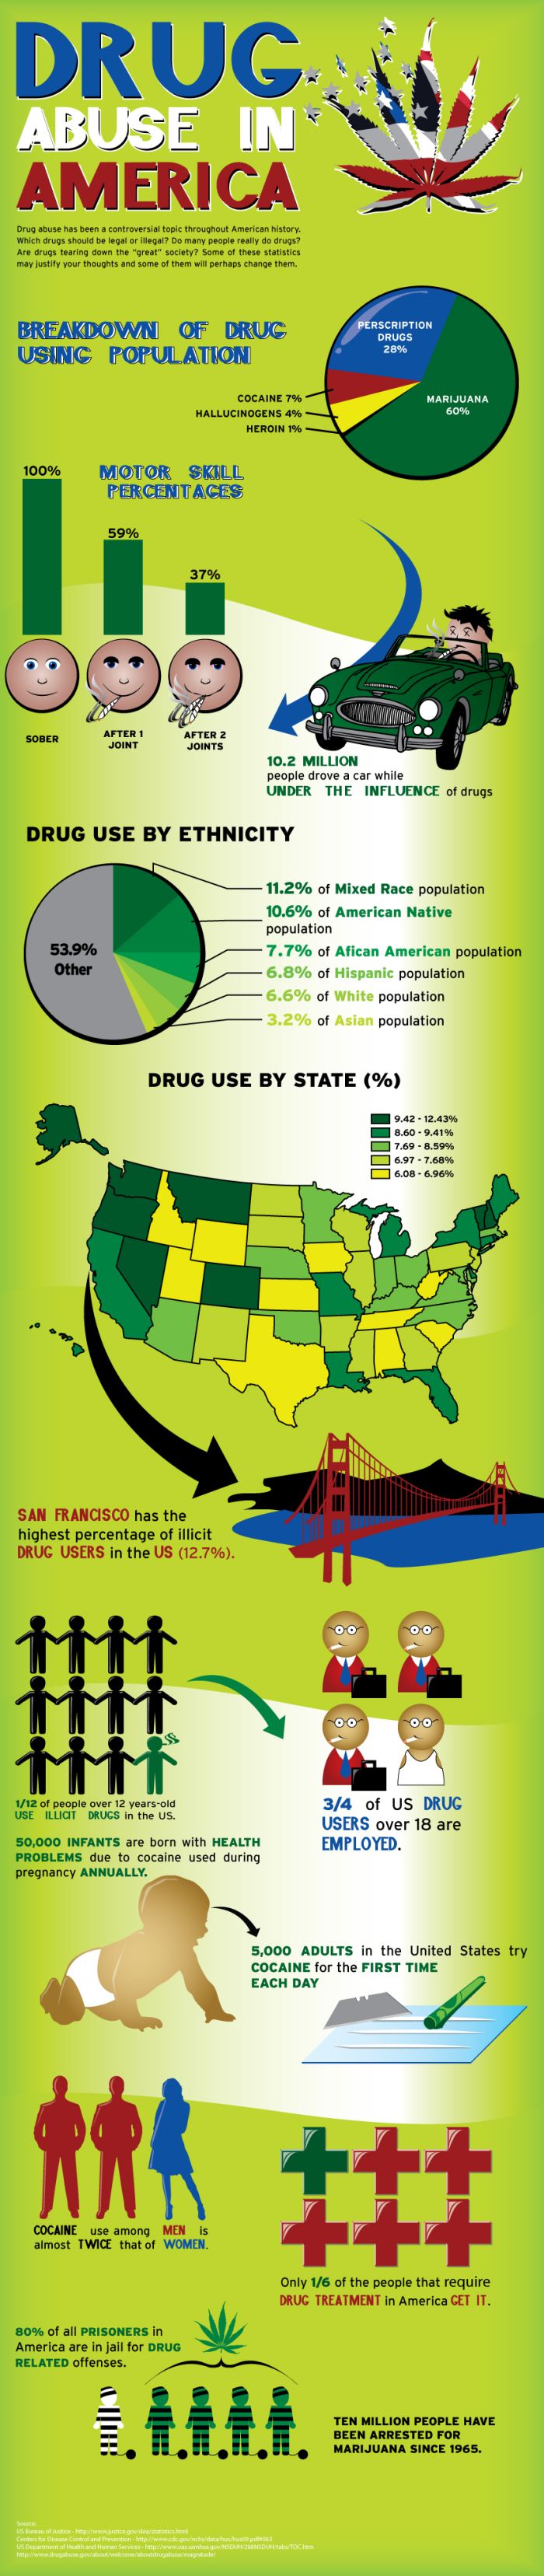 Drug Abuse in America (infographic)